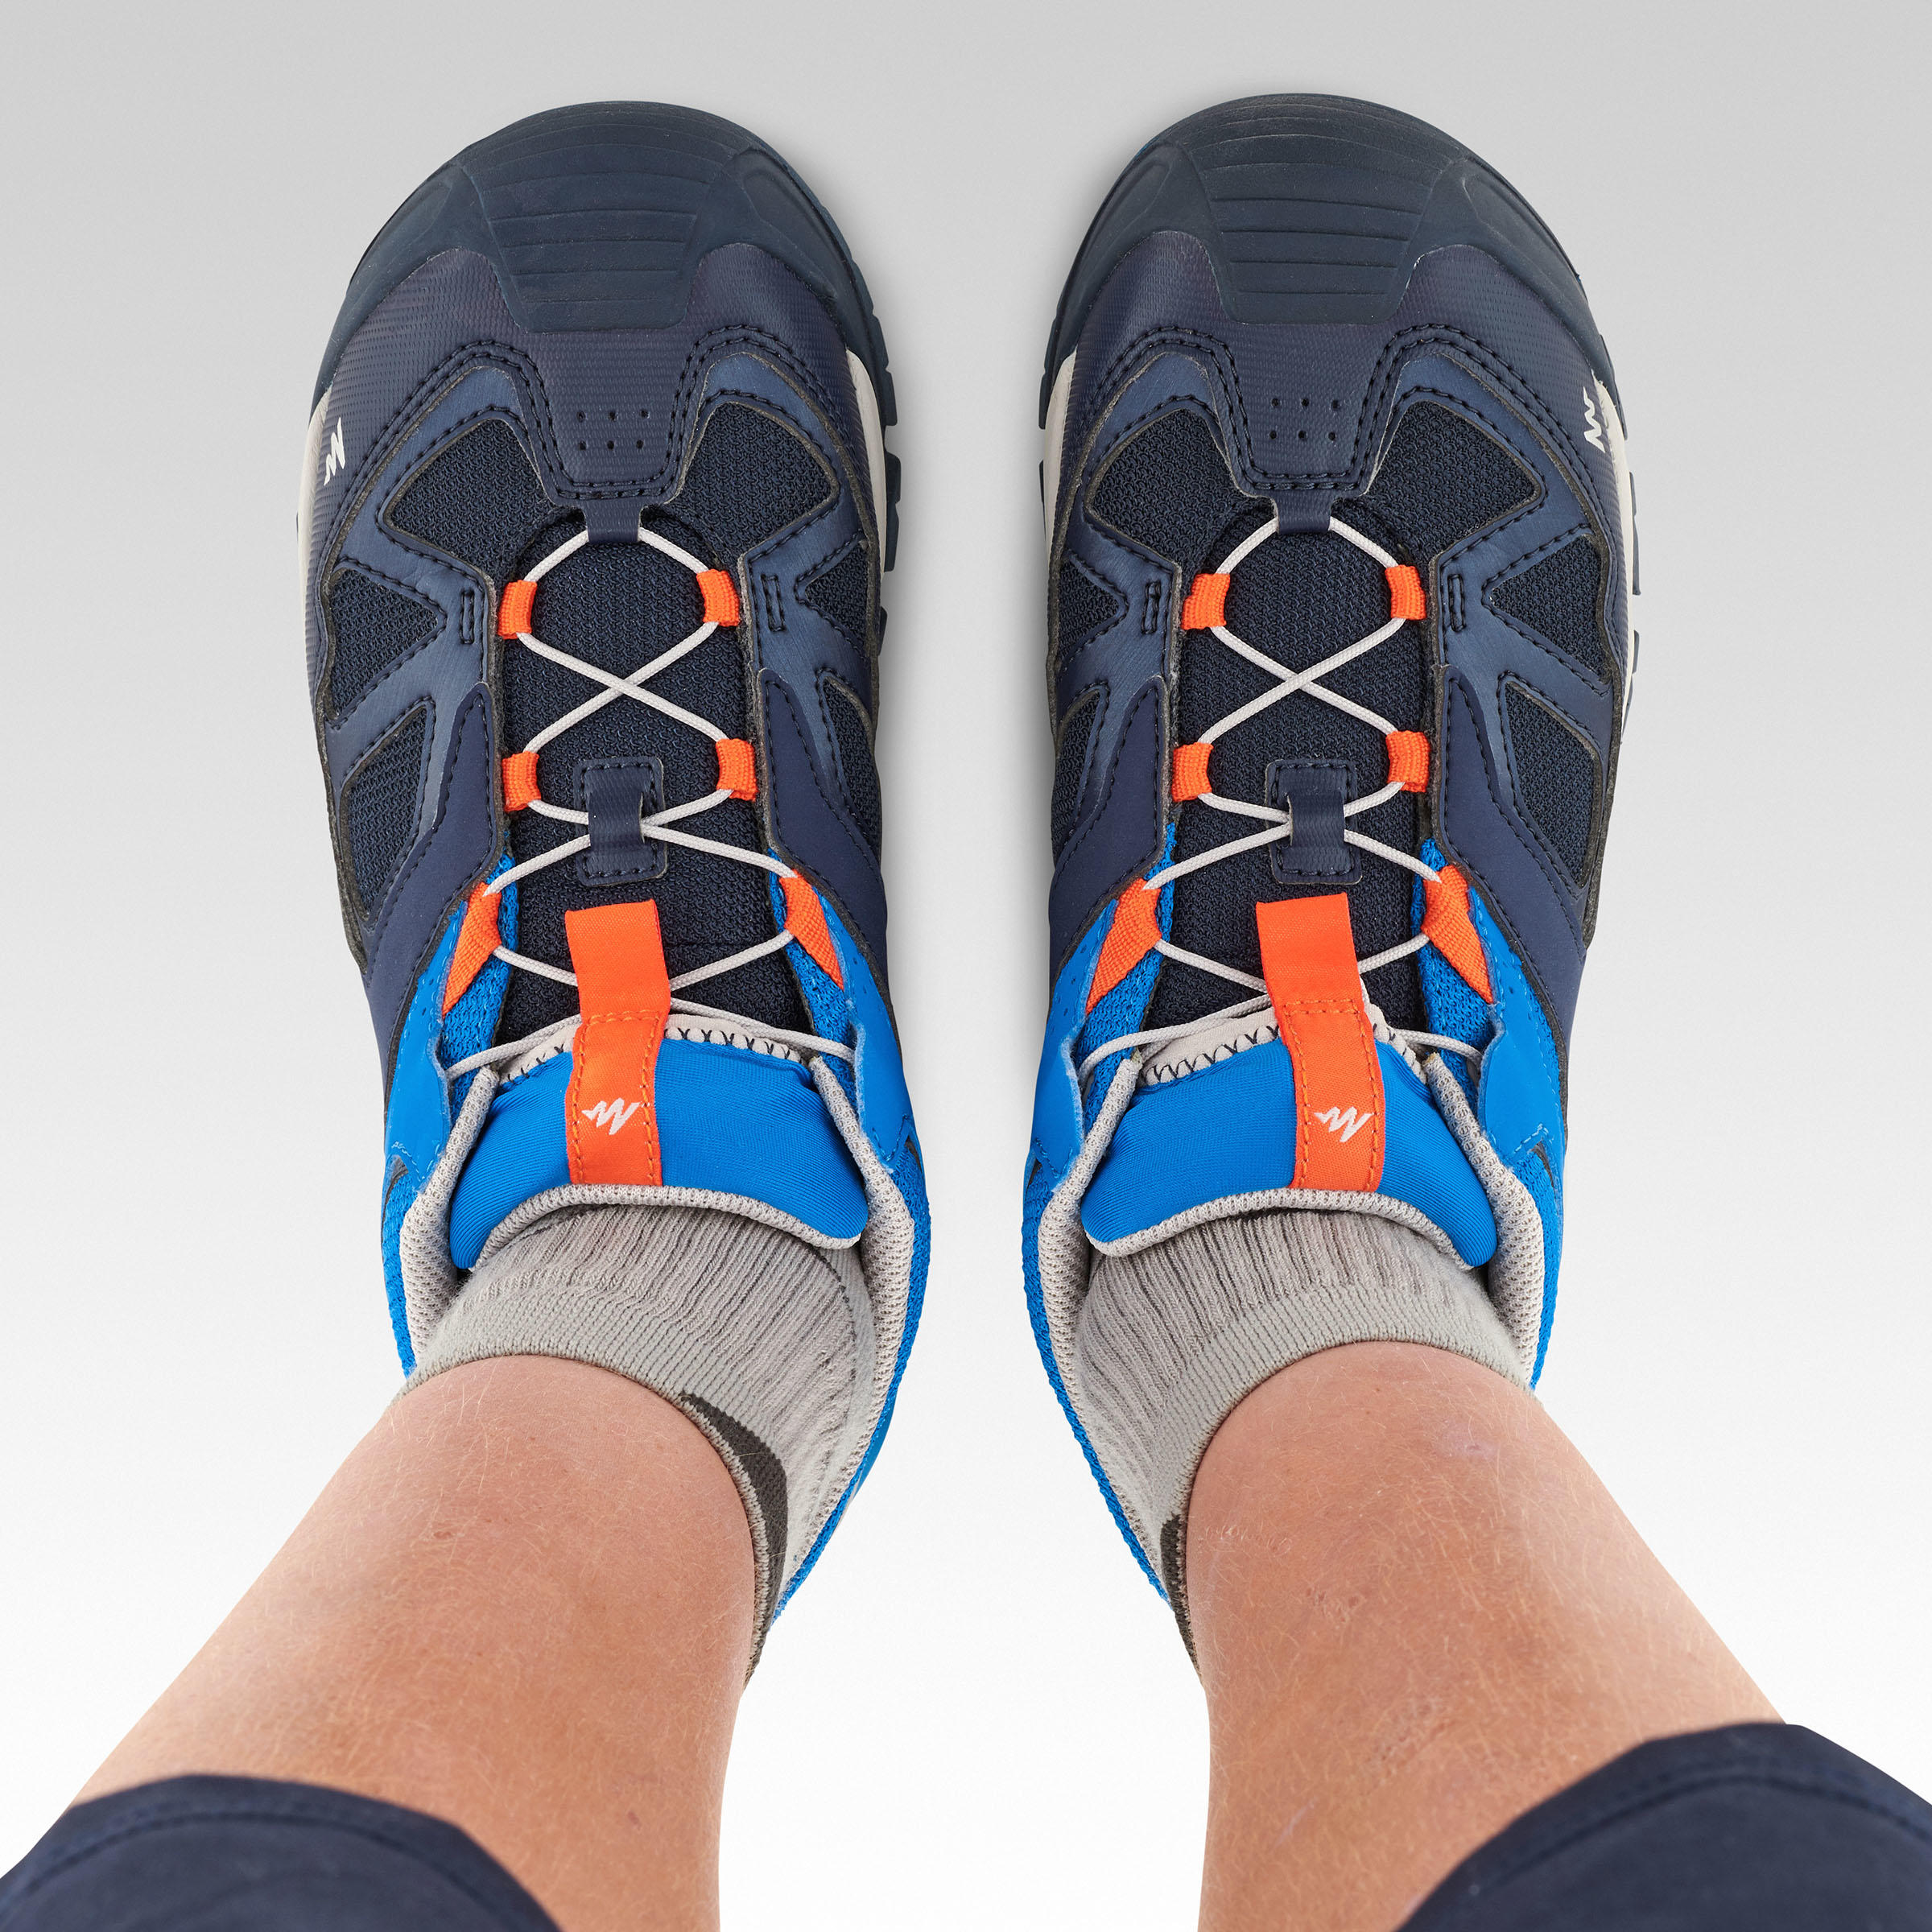 Kids' Low Lace-up Shoes - Sizes 2.5 to 5 - Blue/Orange 6/20